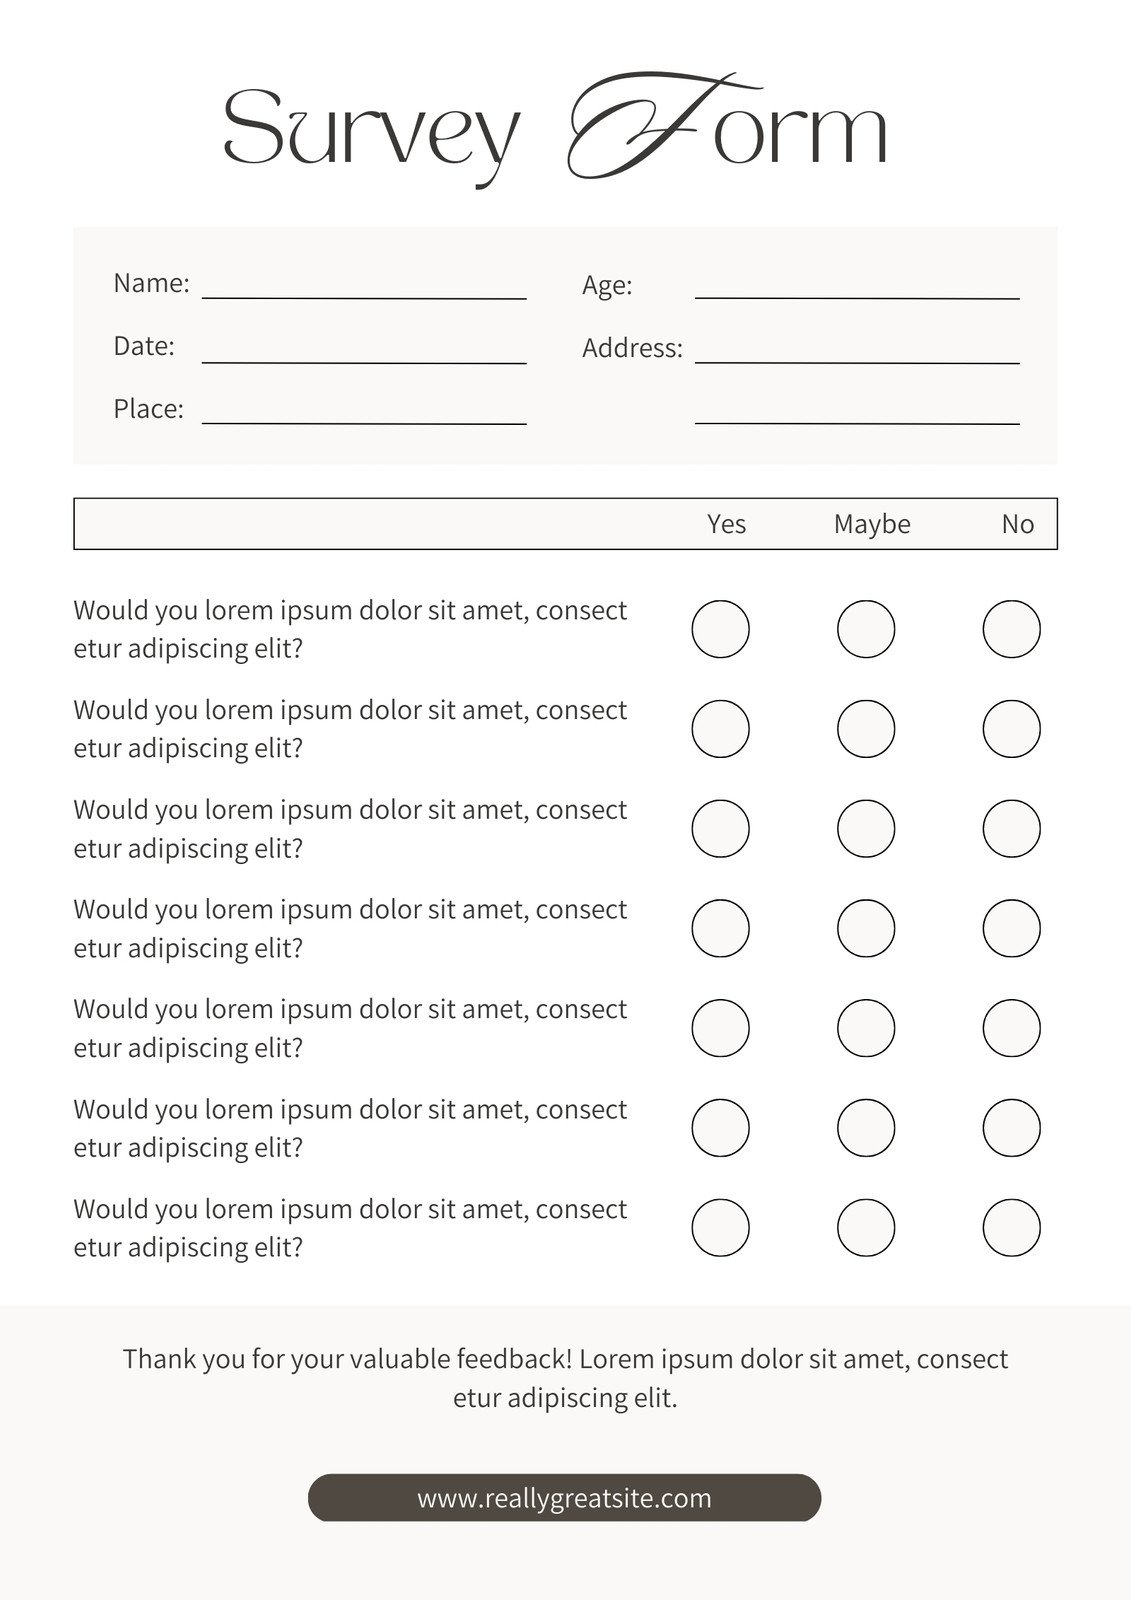 Image Result For Customer Feedback Form Template Word vrogue co